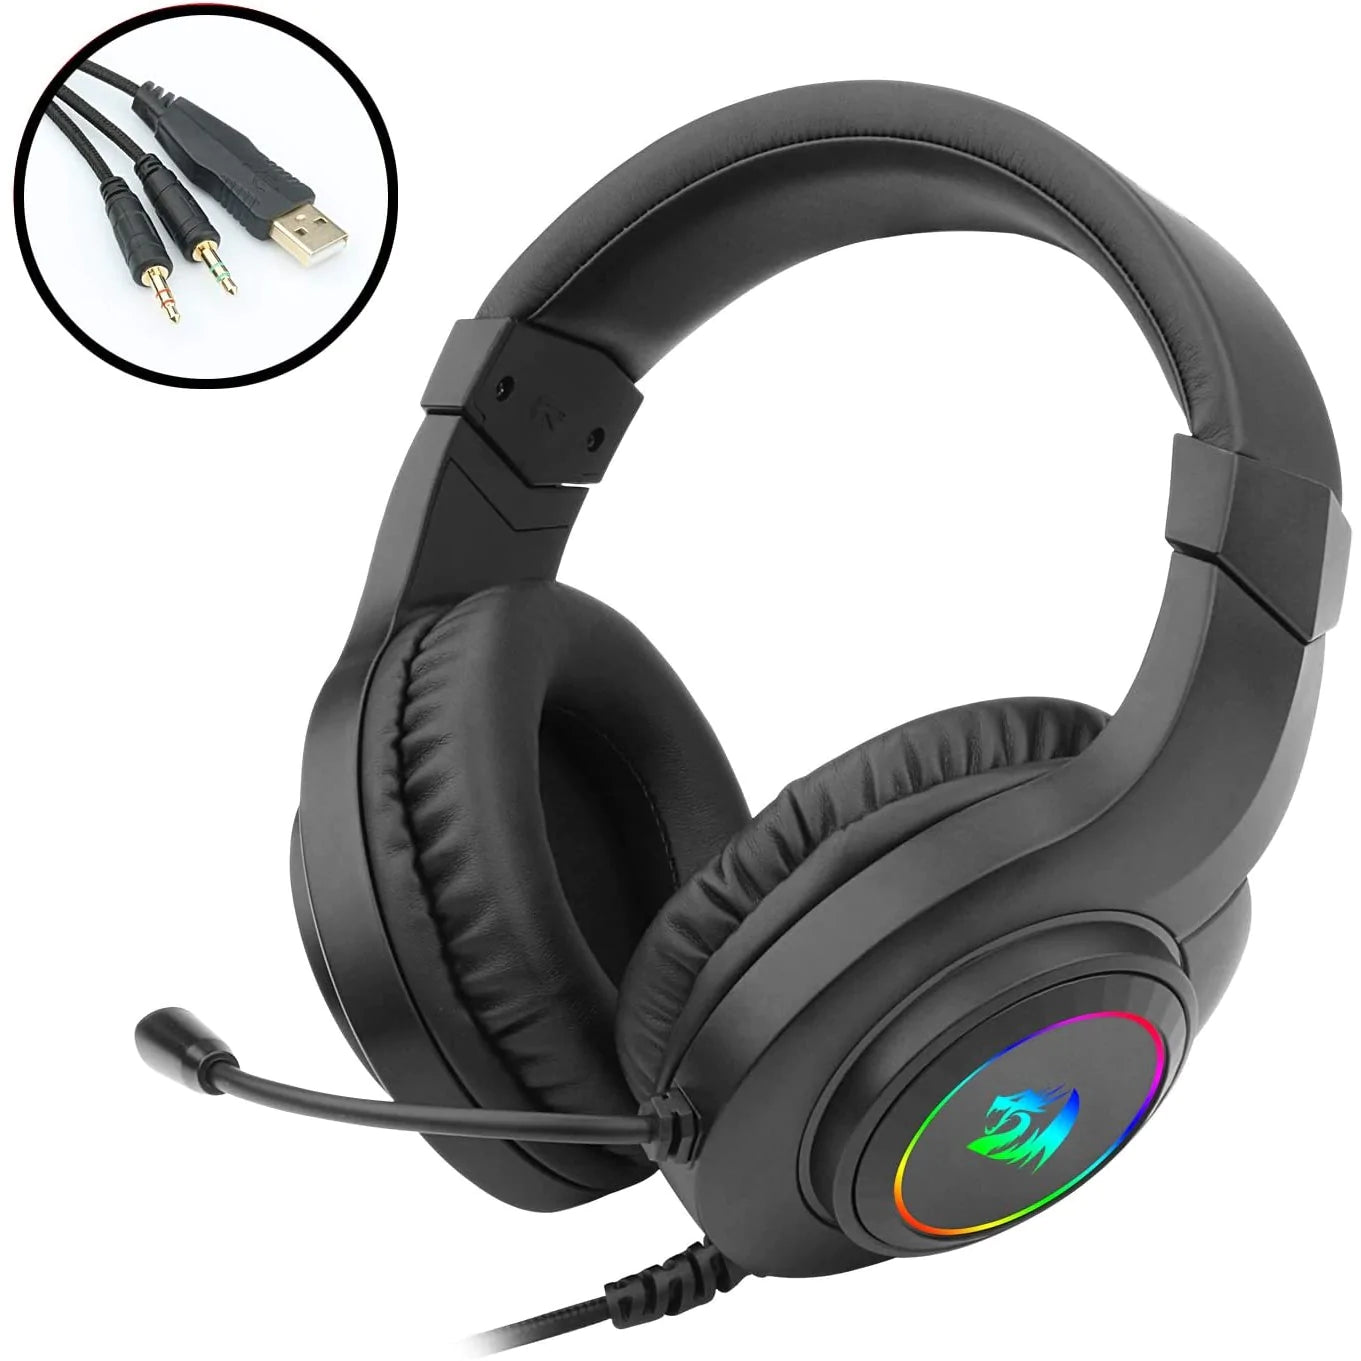 Redragon Hylas H260 RGB Gaming Headset with Microphone, Wired, Compatible with PS4, PS5, PC and Laptops Black